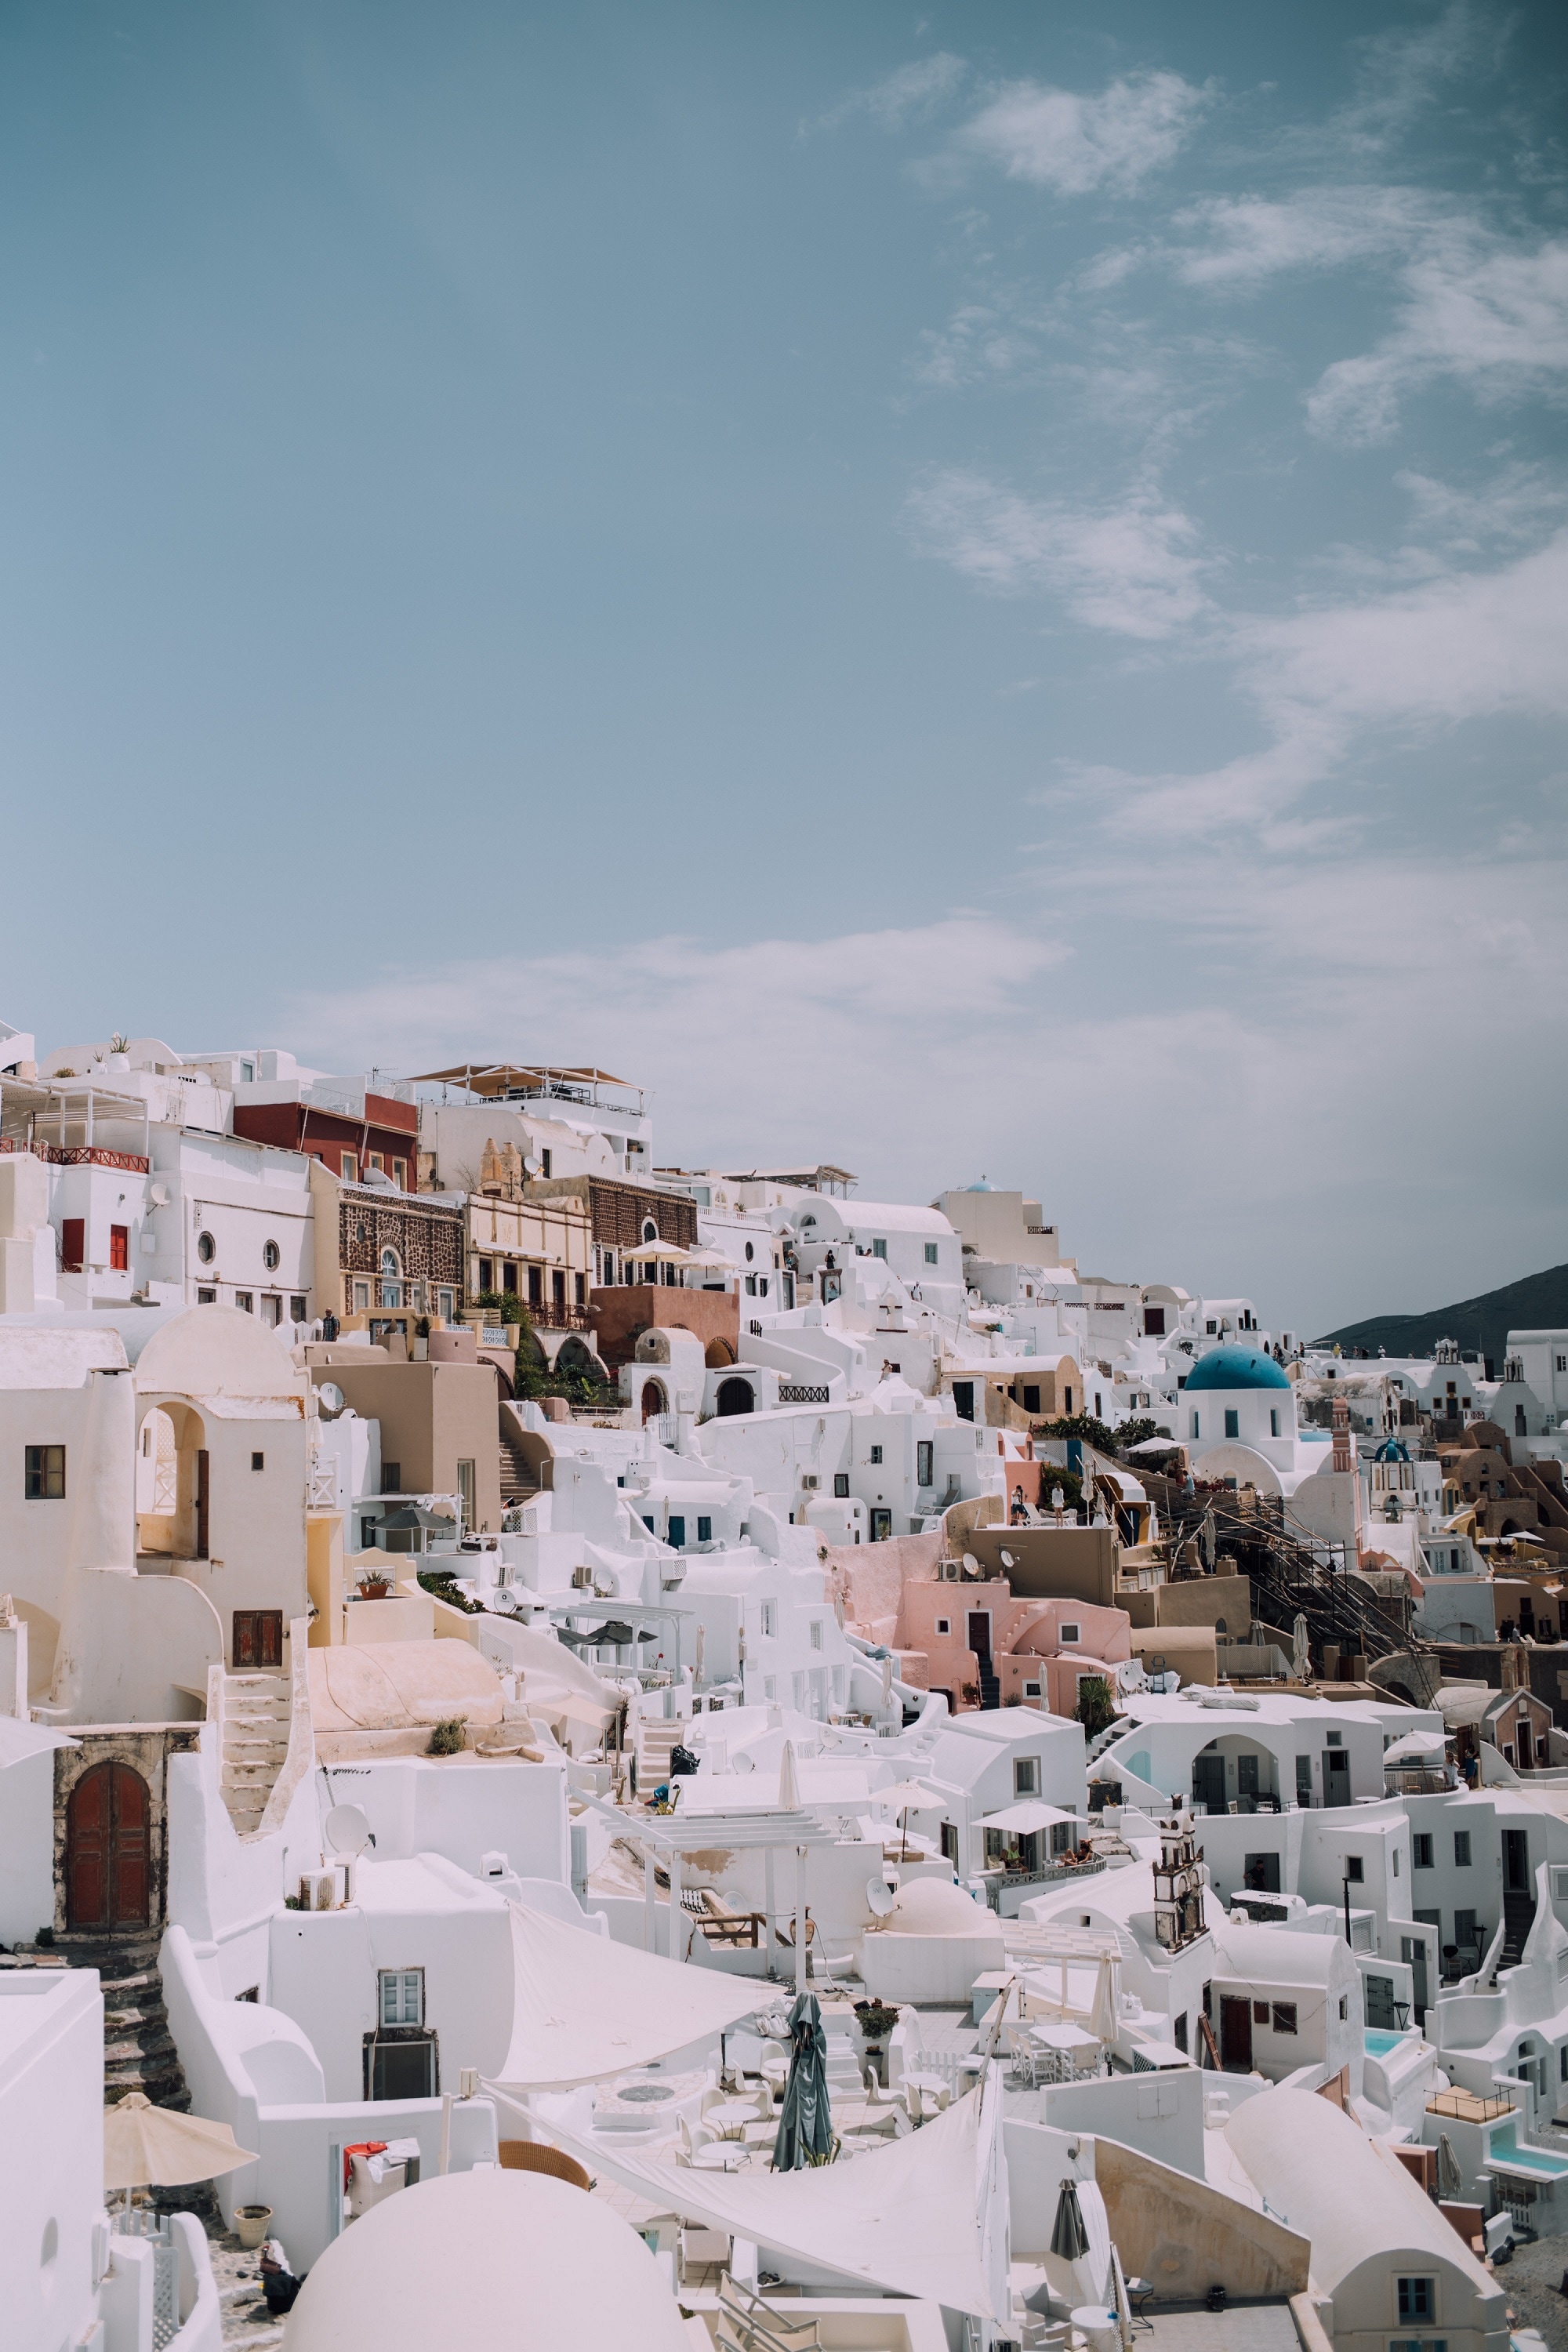 The Greece white buildings